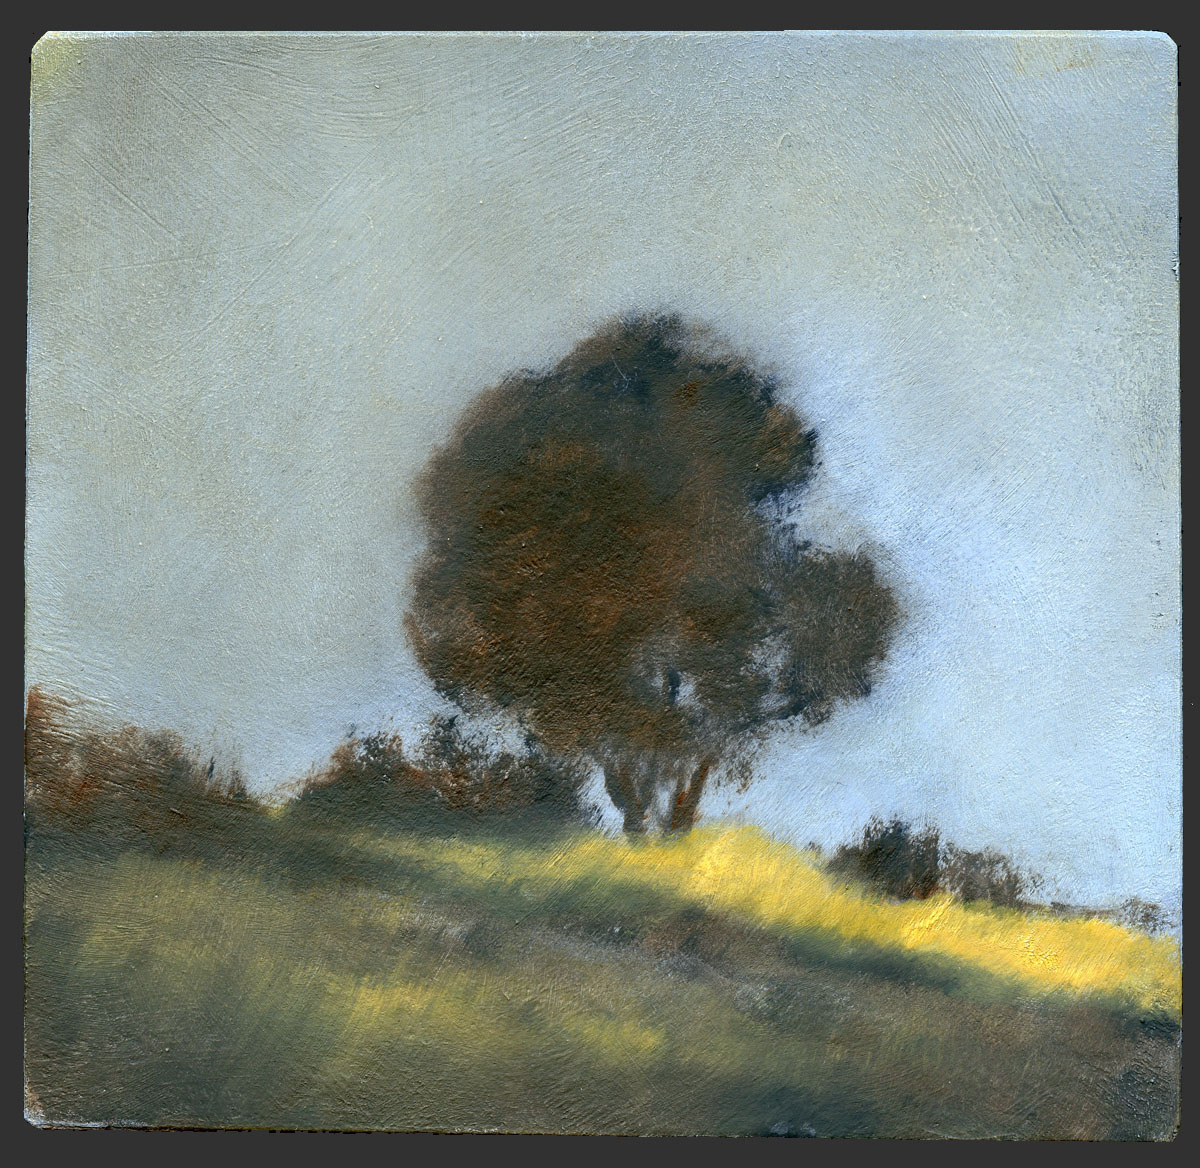 Summer AfternoonOil on panel - 6 in. x 4.25 in.Endowed - Completed 2021 June